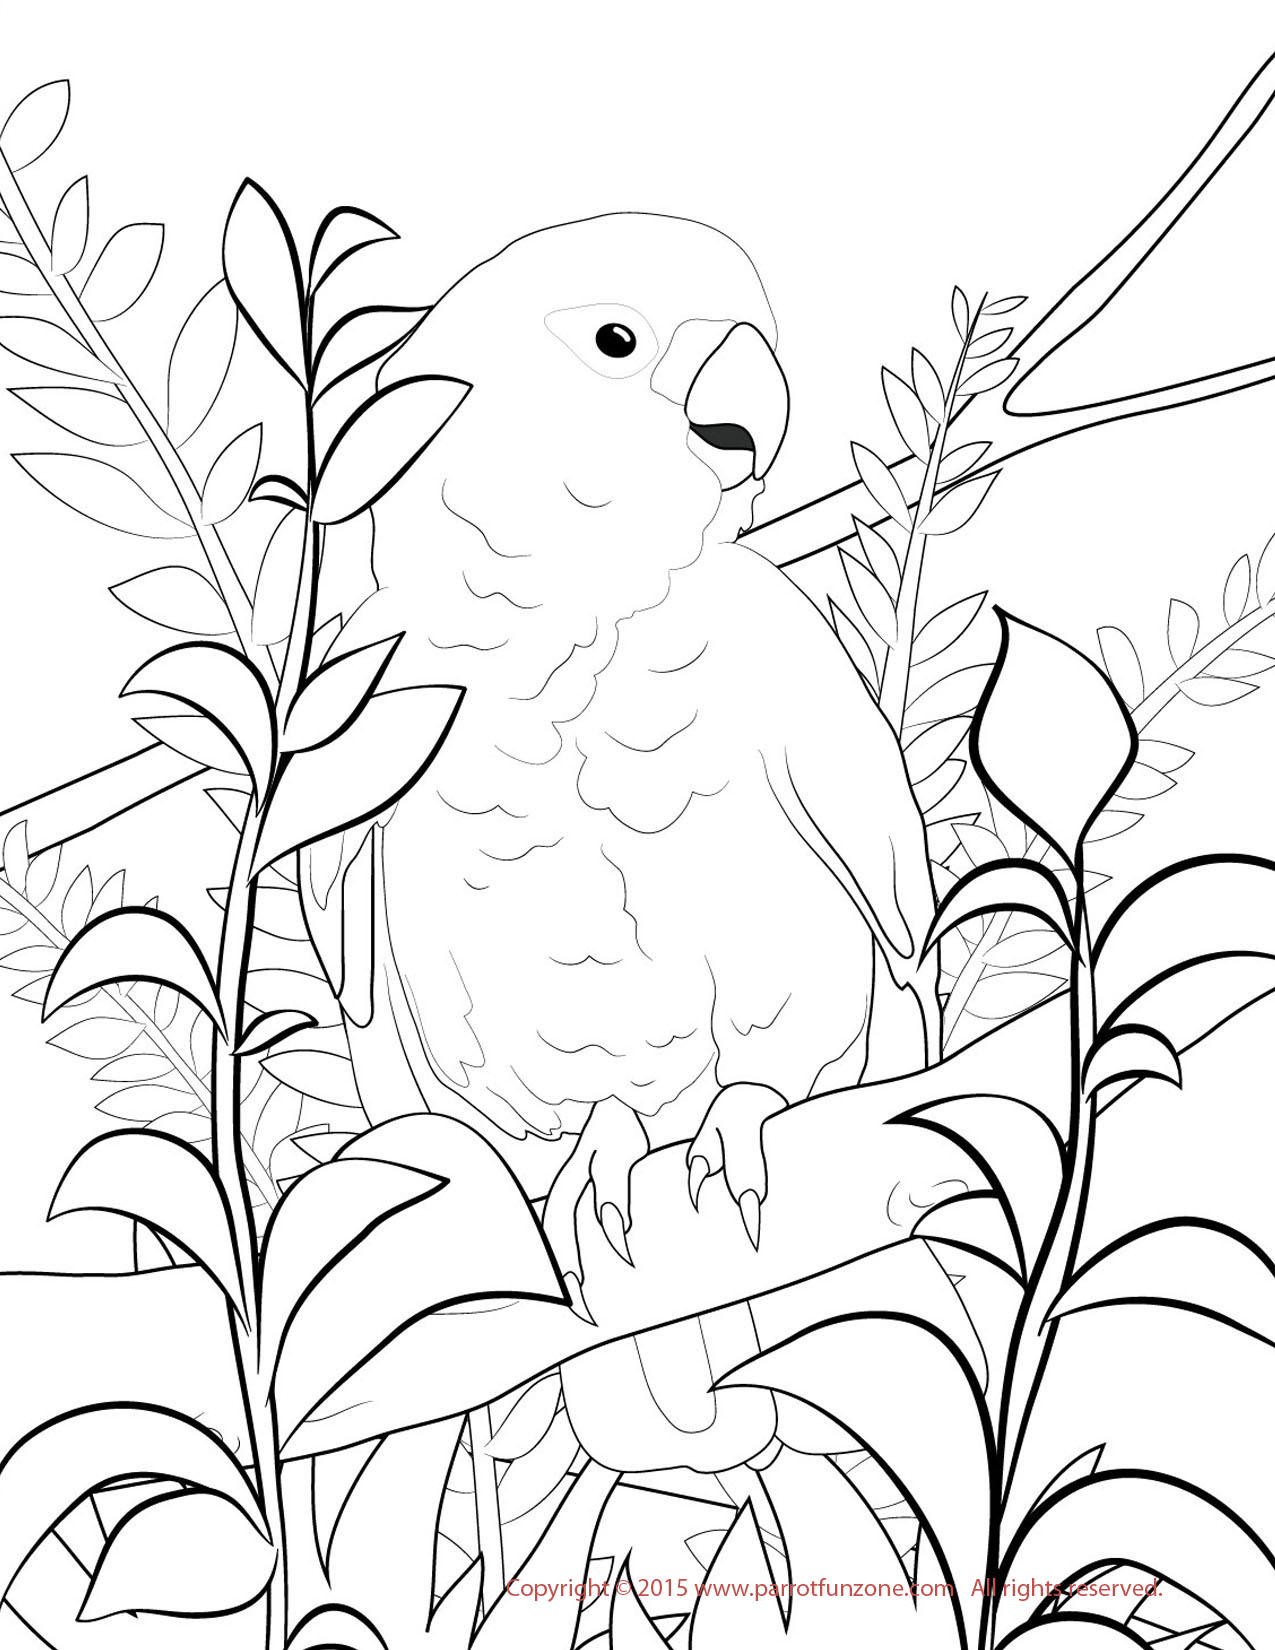 White Cockatoo coloring #18, Download drawings